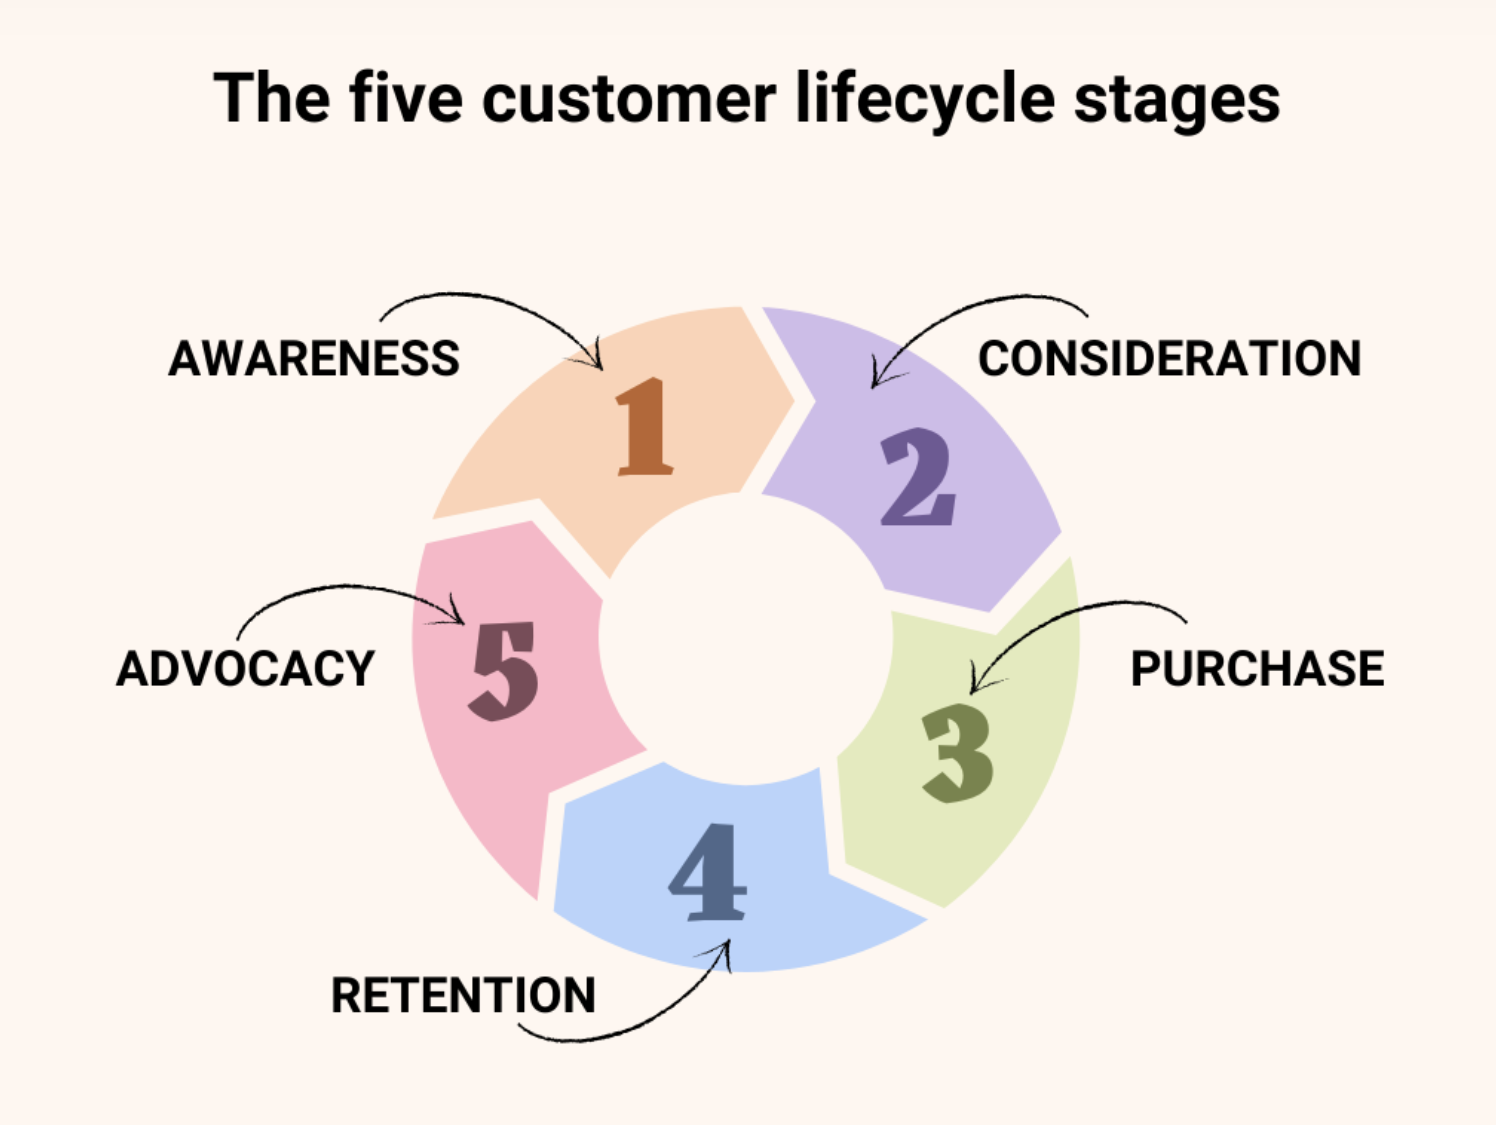 The five stages of the customer lifecycle.